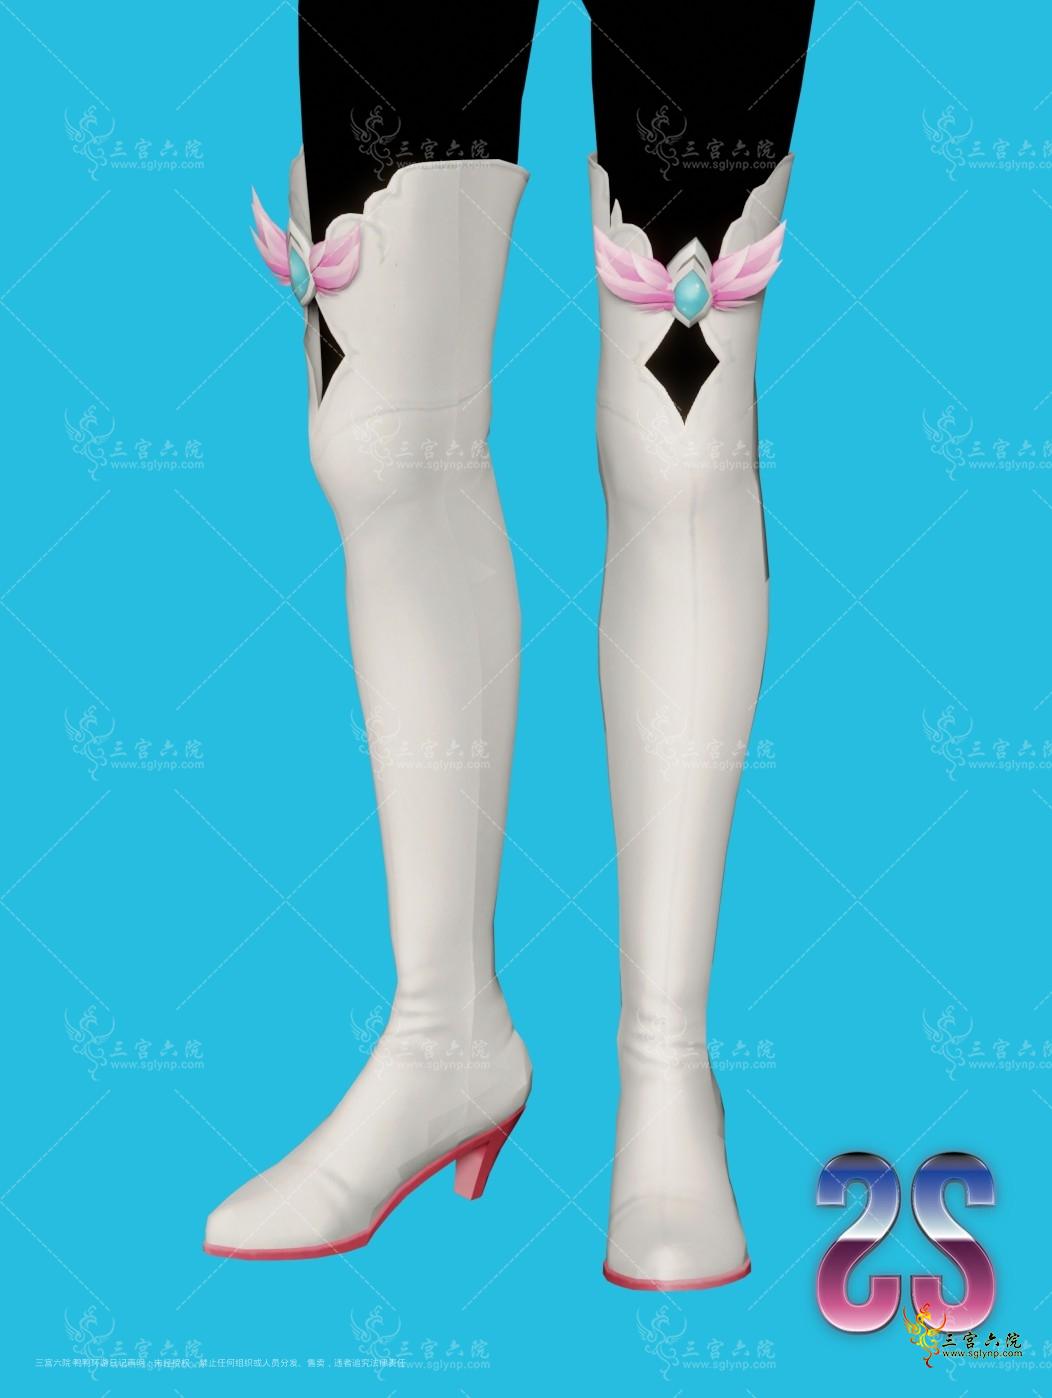 MV shoes preview.png